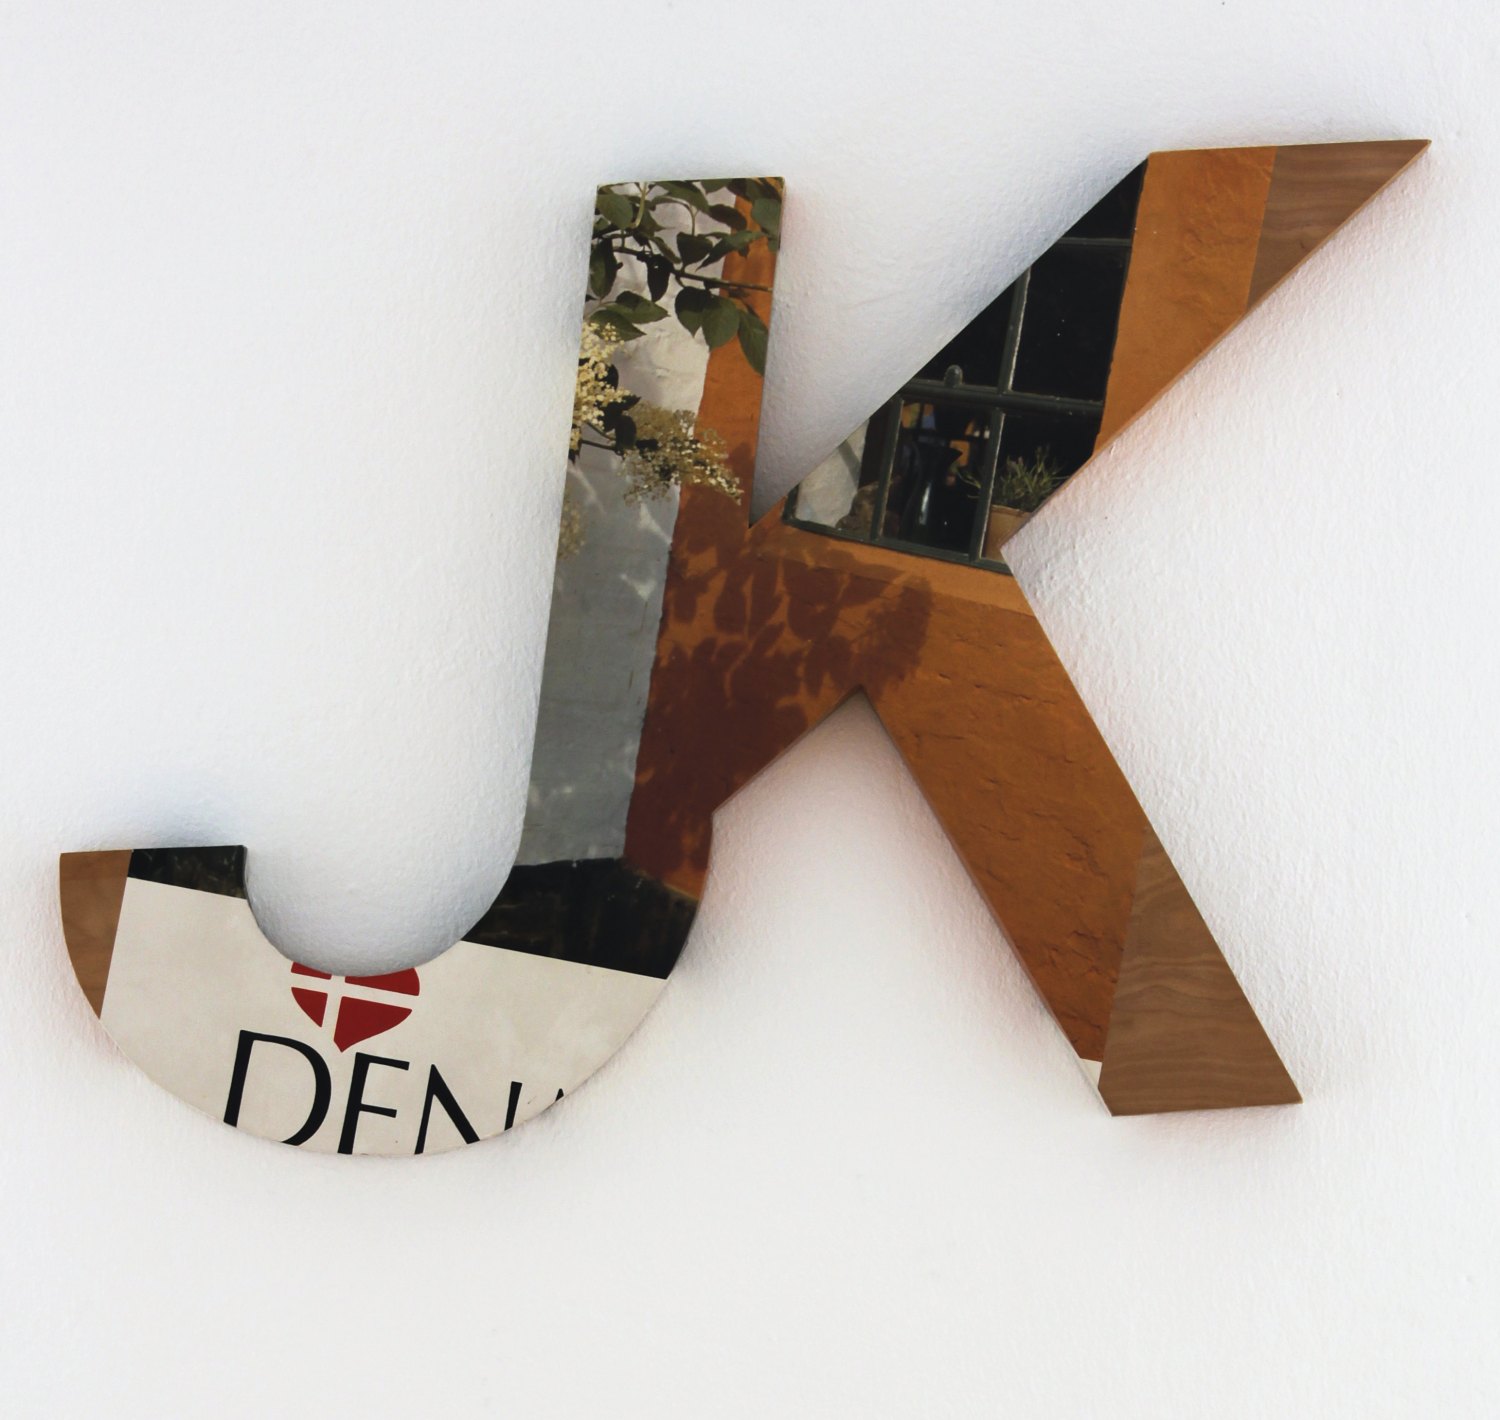 John Knight Danemark (Project for Documenta 7), 1982   Printed paper collage on plywood  71  x 78 x 3,8 cm